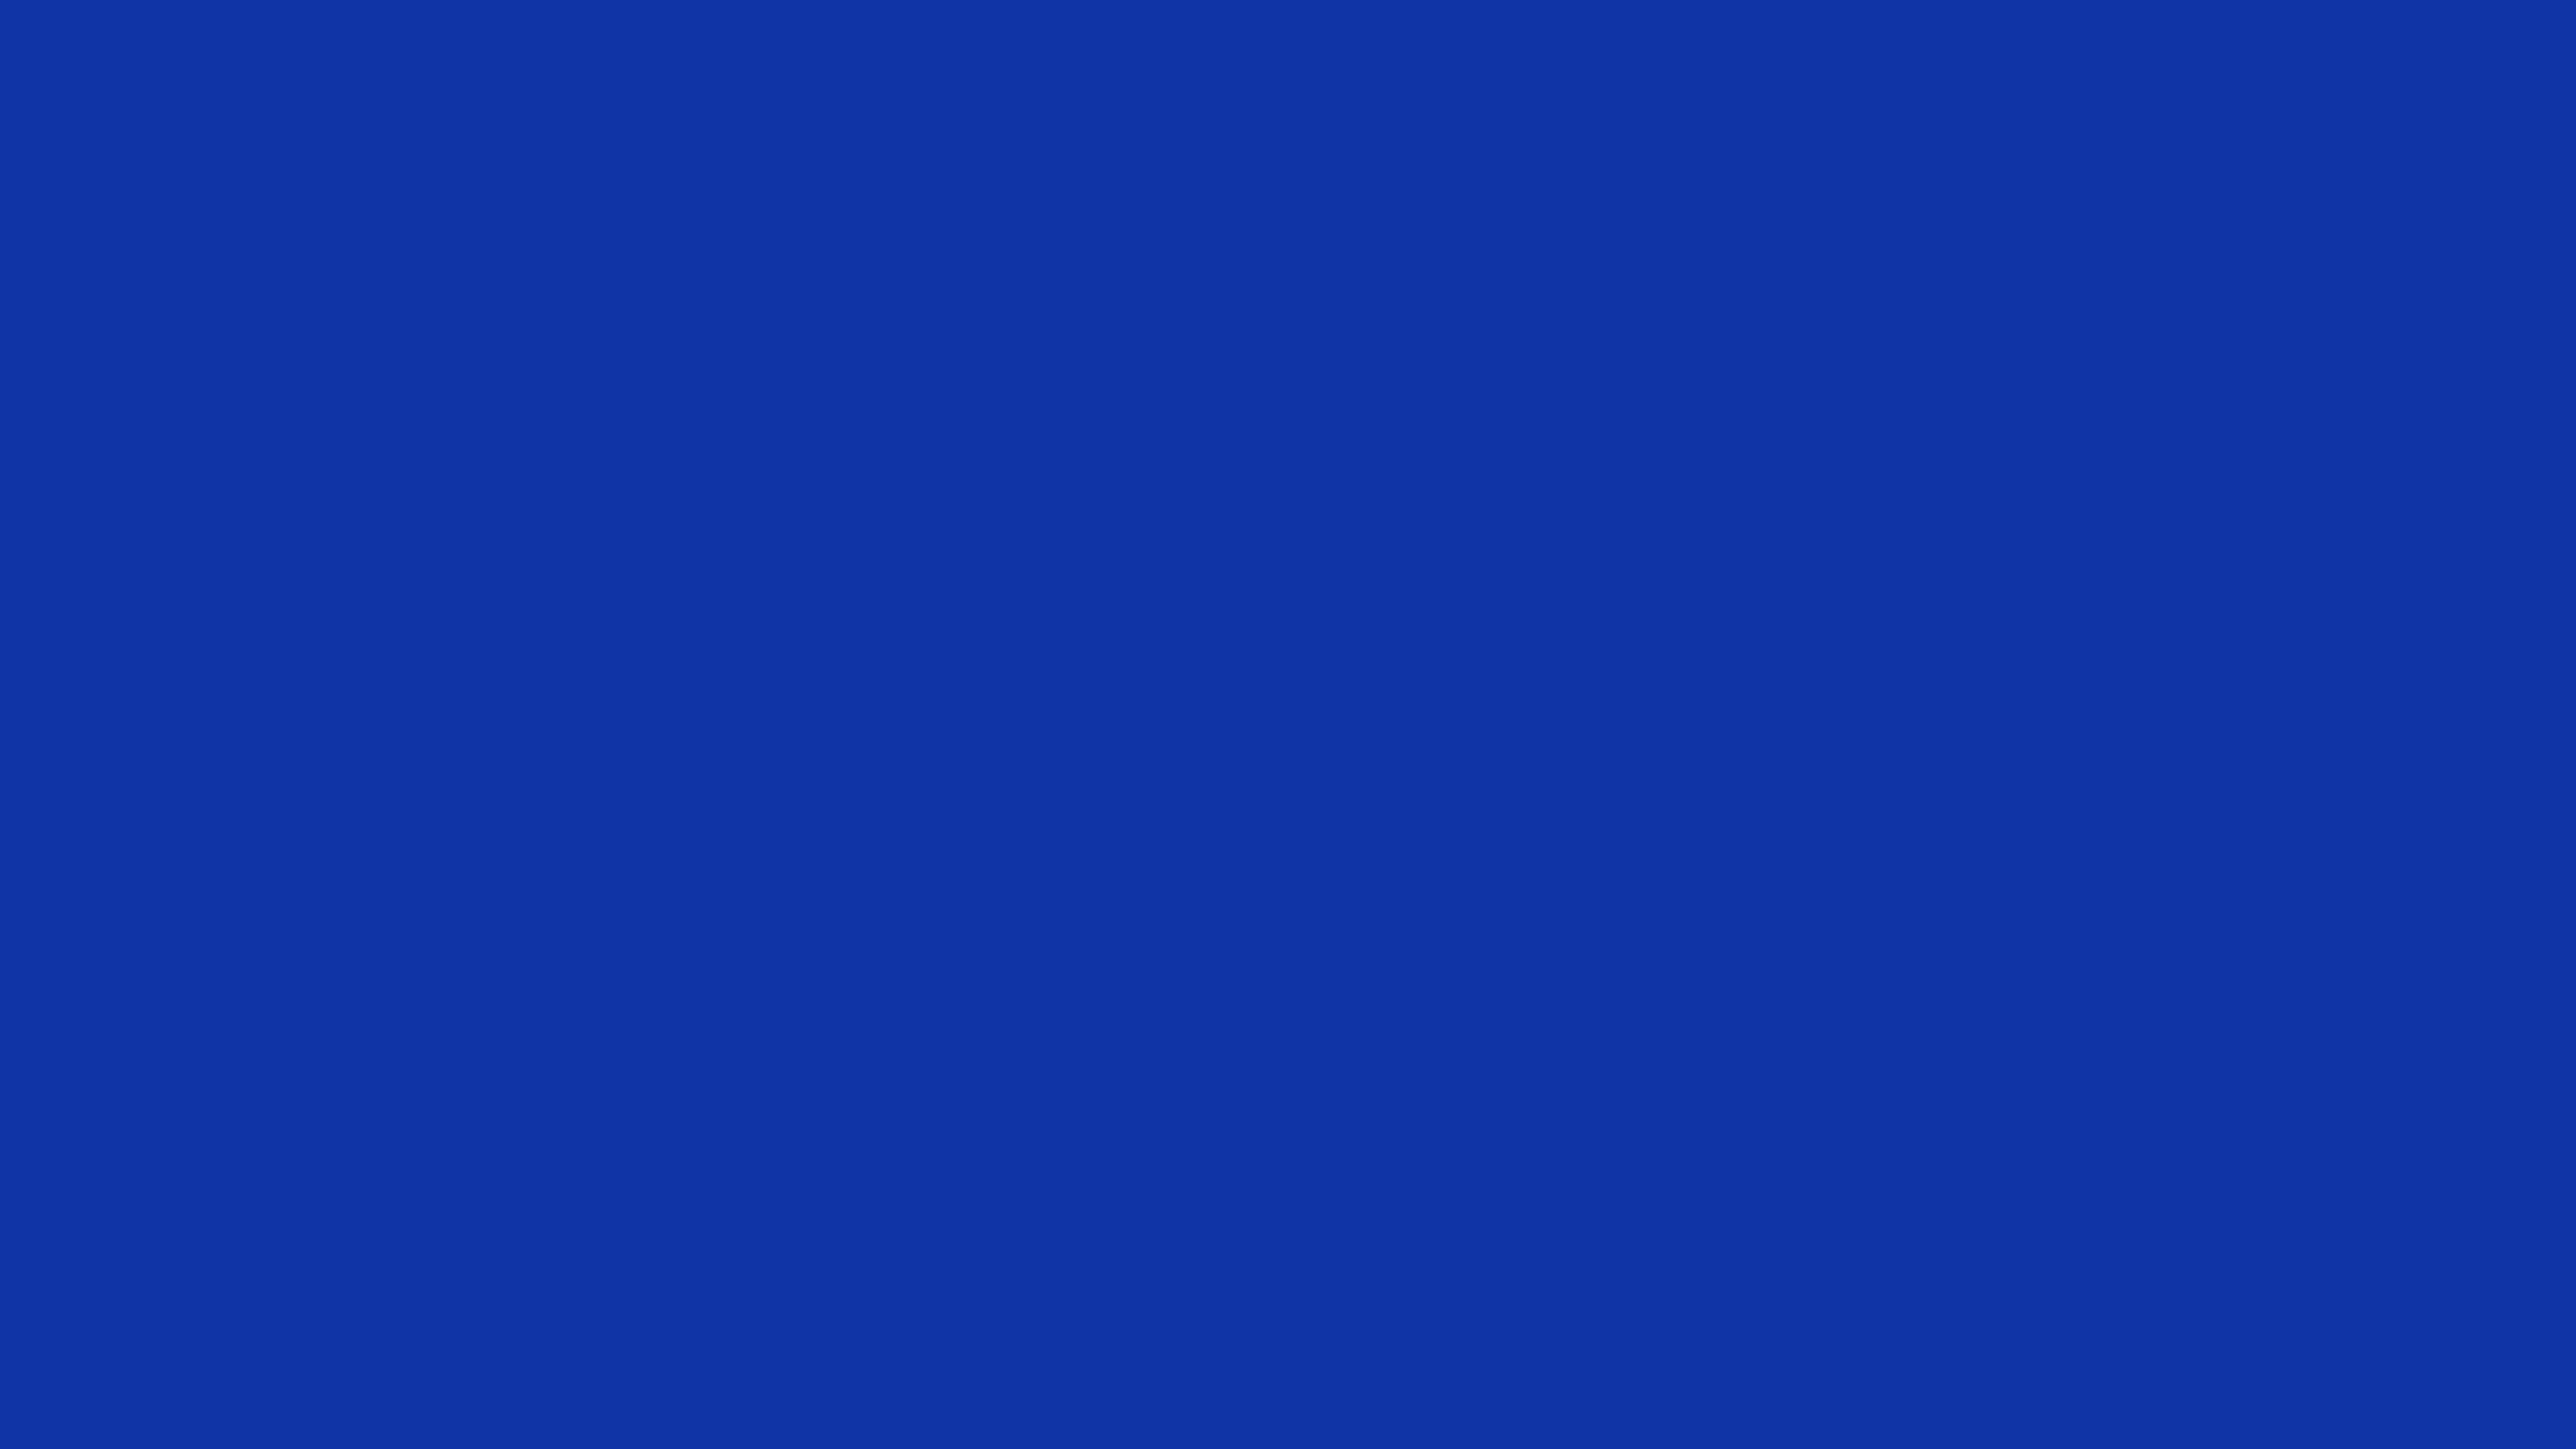 5120x2880 Egyptian Blue Solid Color Background